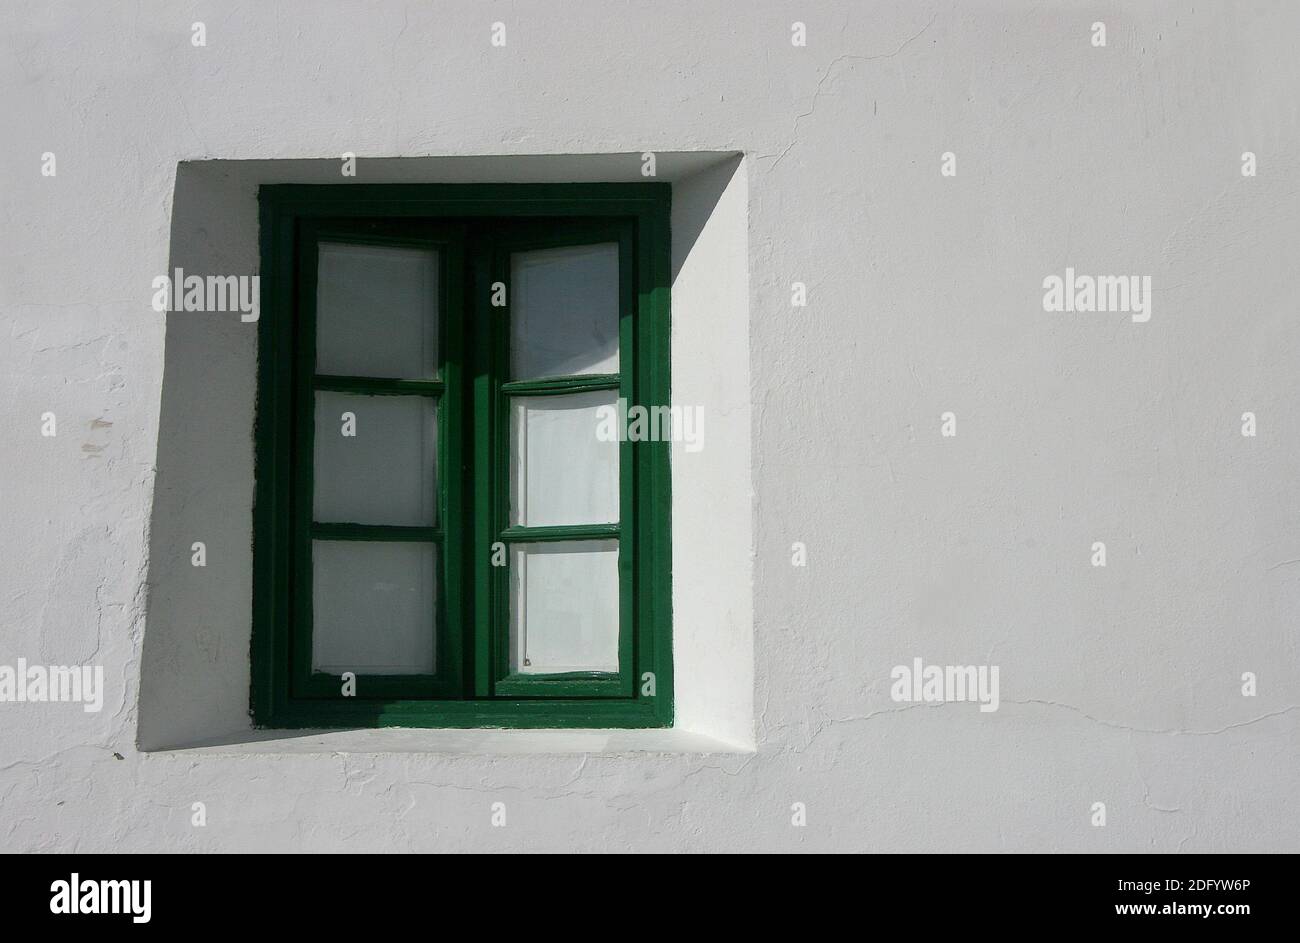 Green and white Stock Photo